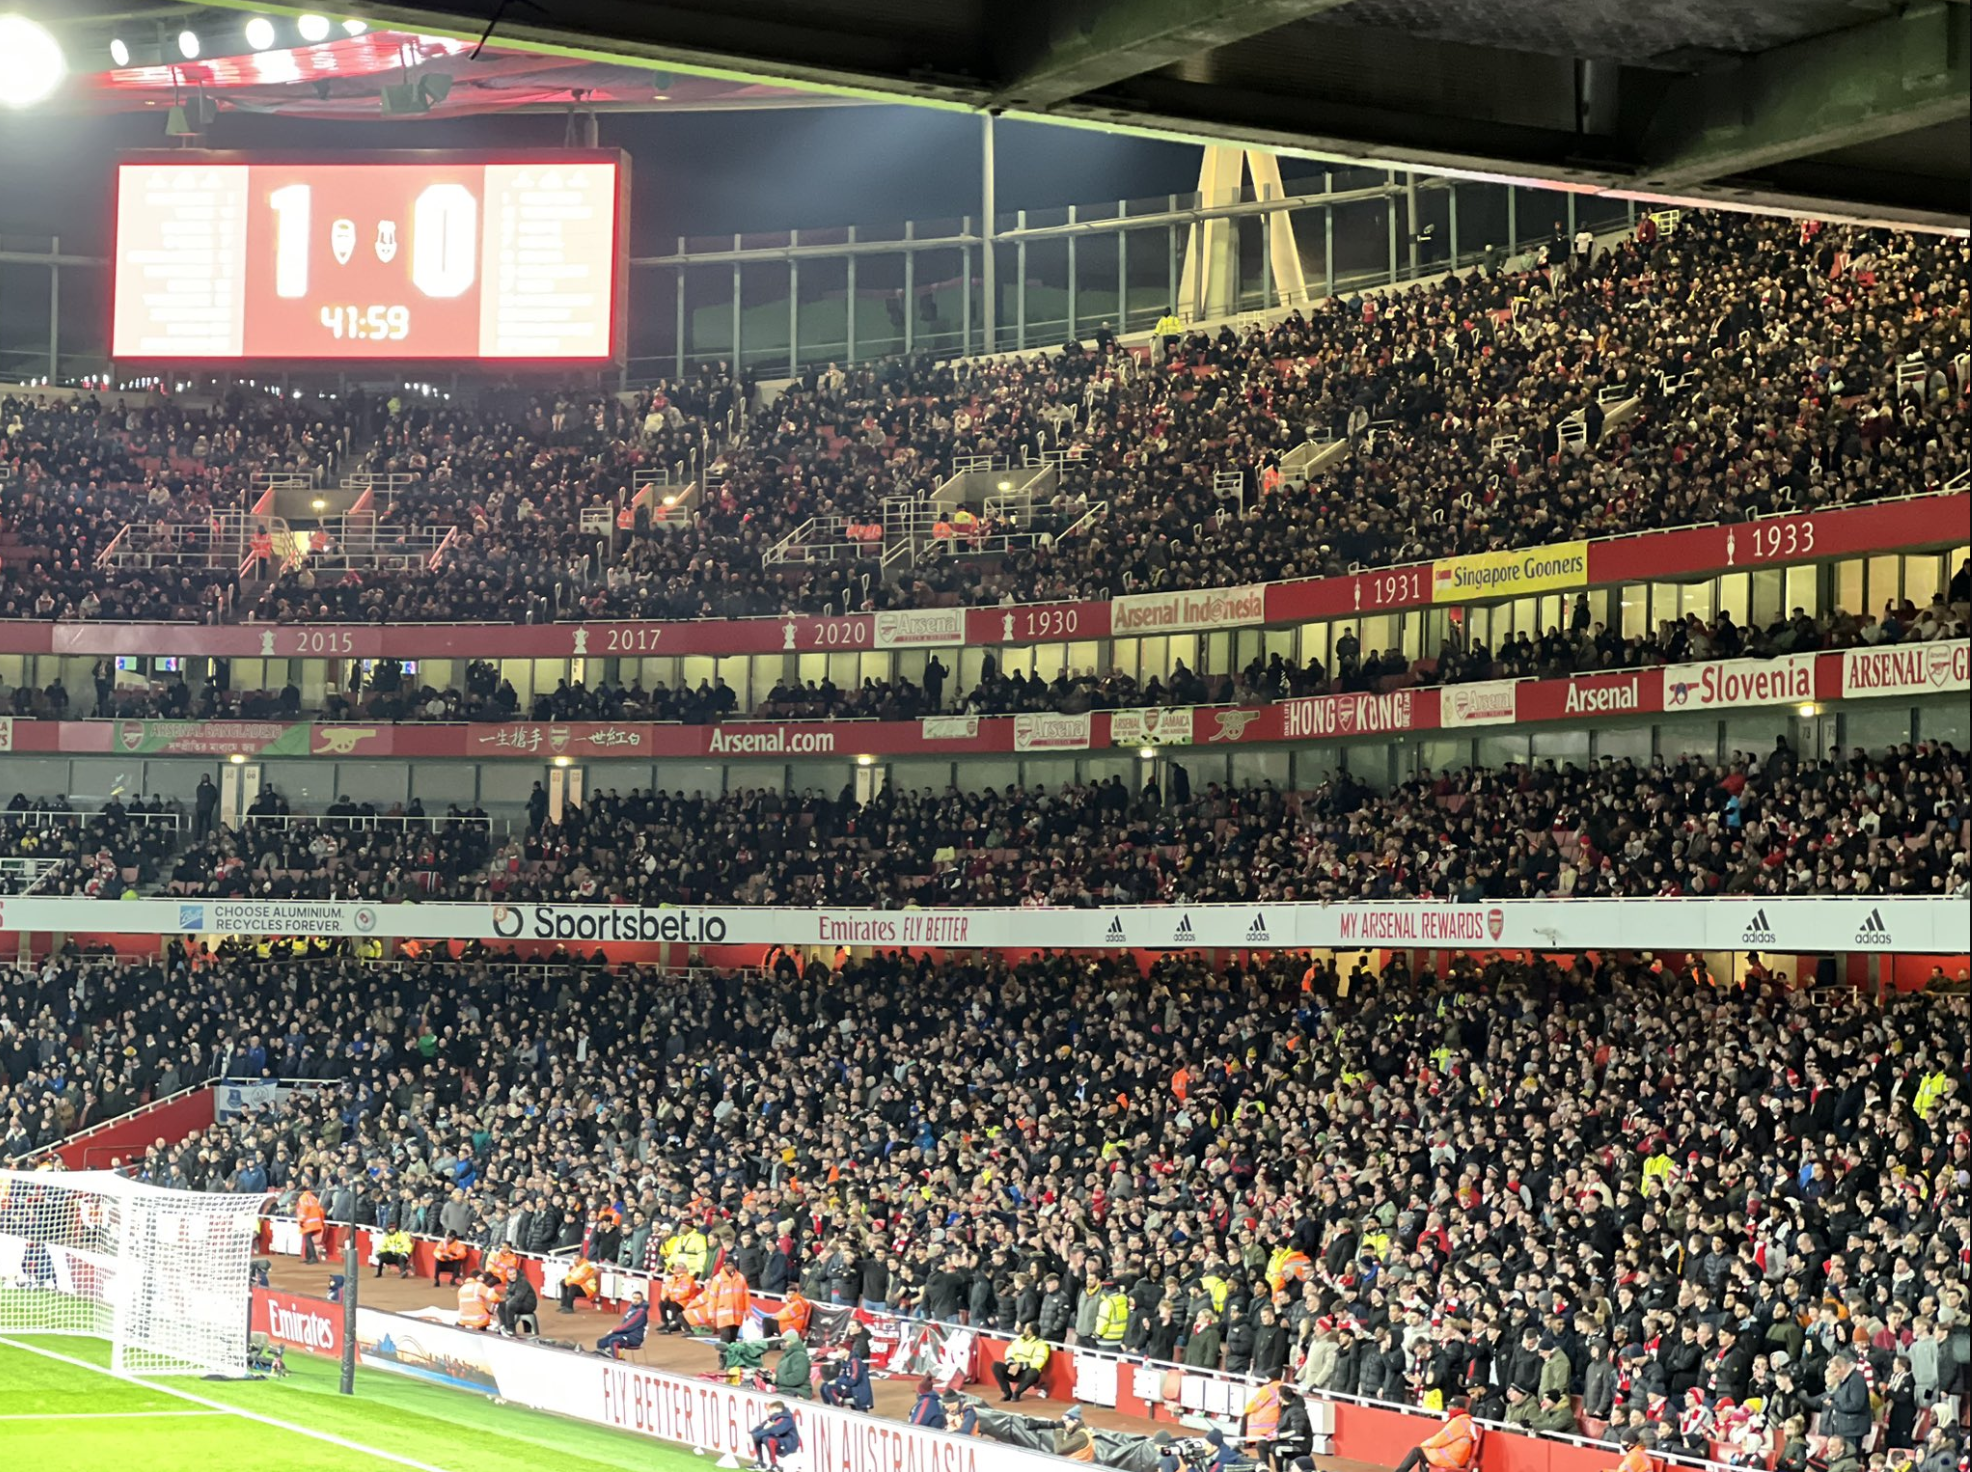 Arsenal Women Supporters Club